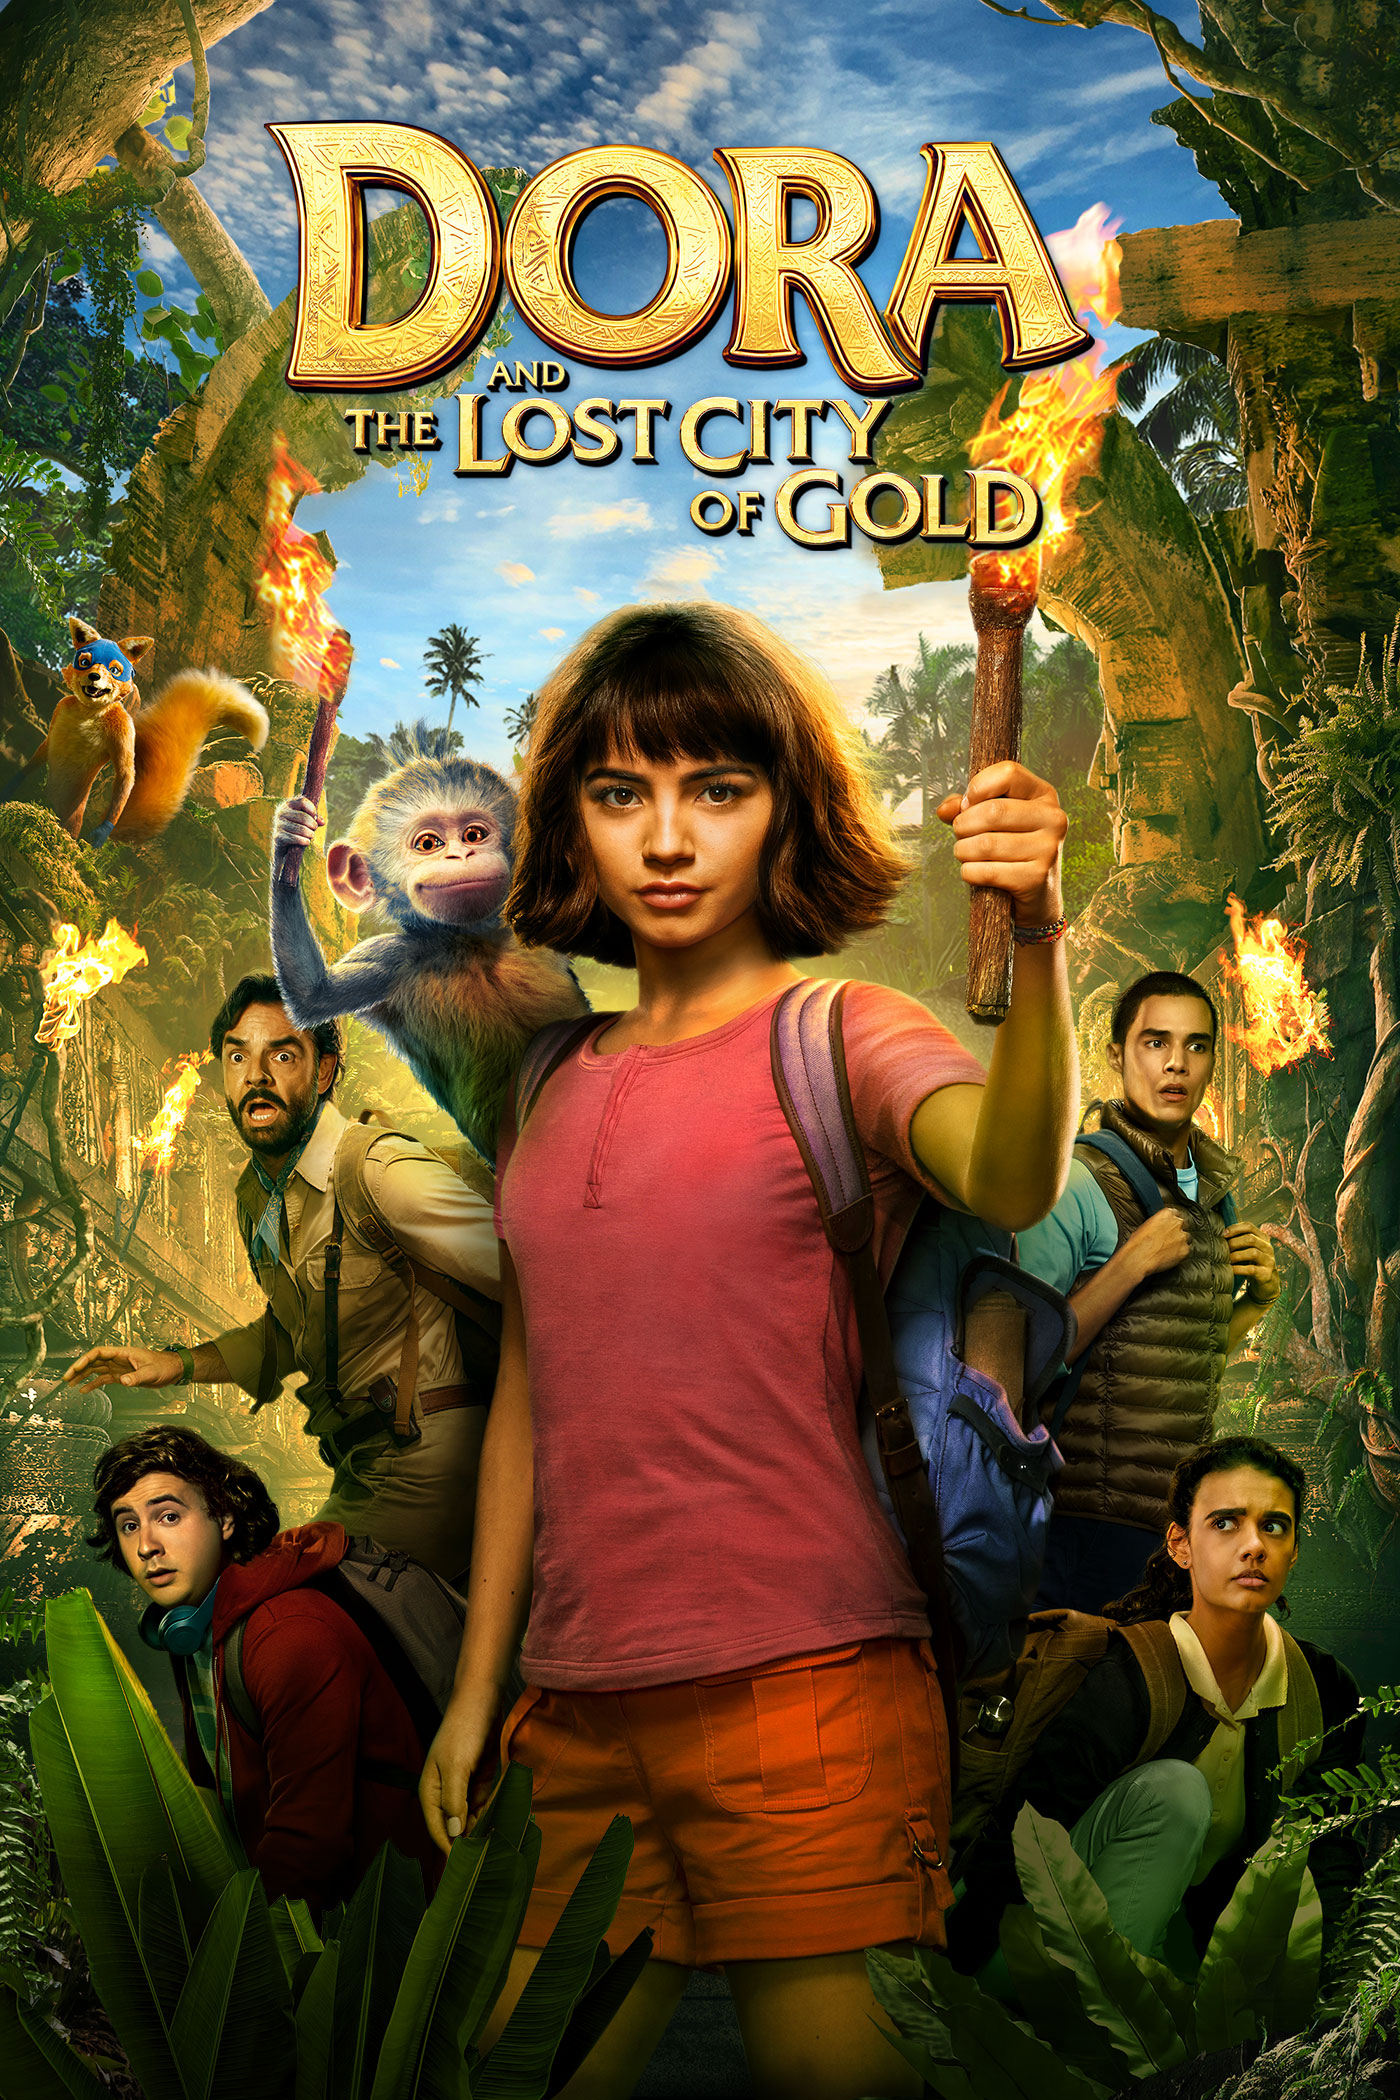 Dora & The Lost City of Gold Giveaway